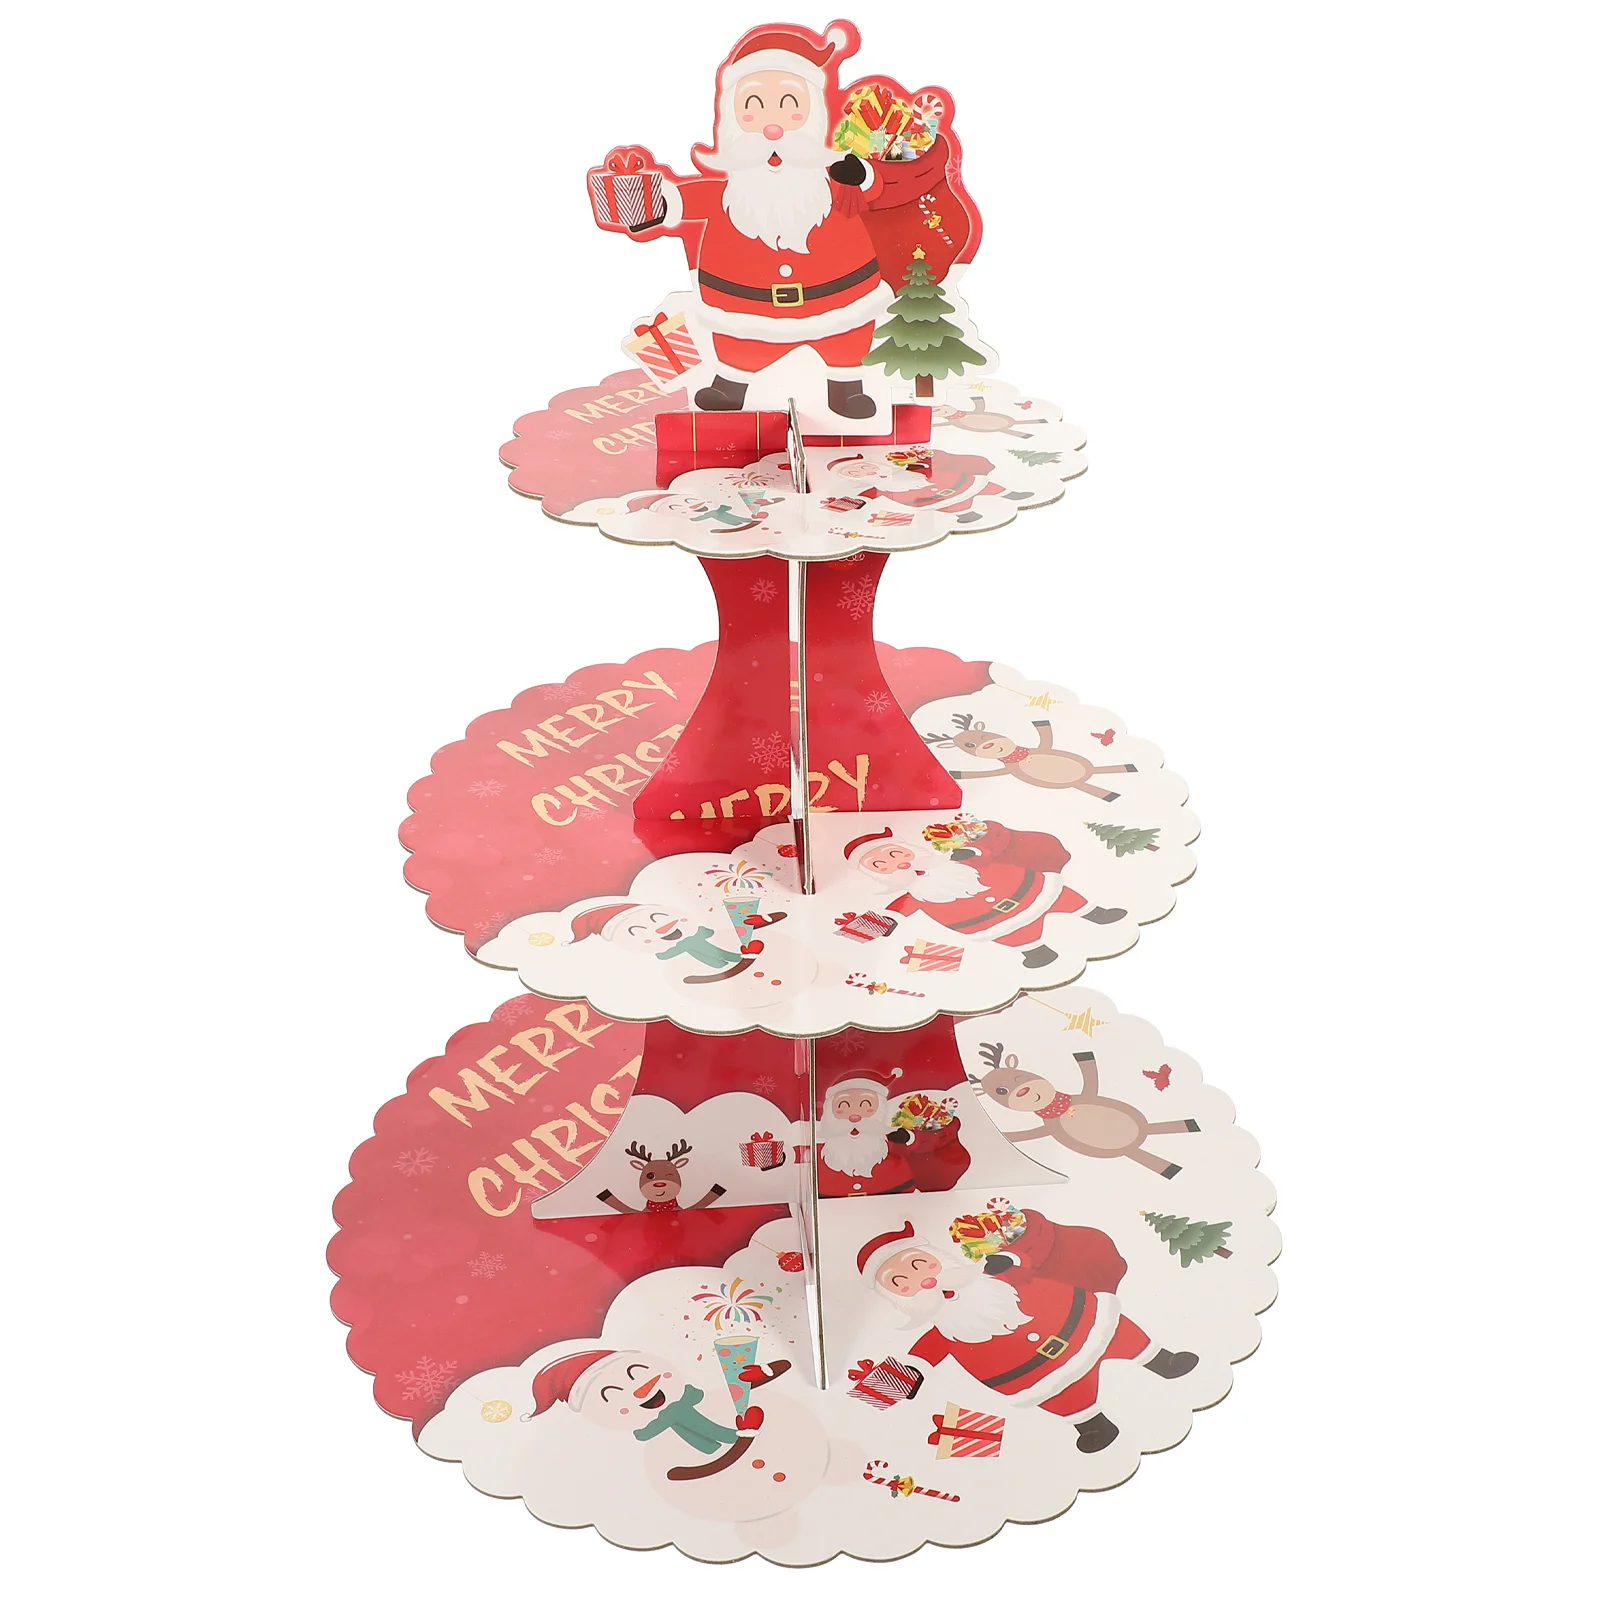 

Christmas Stand Cupcake Tower Dessert Display Cardboard Holder Cake Party Tier Tiered Pastry 3 Serving Tree Decoration